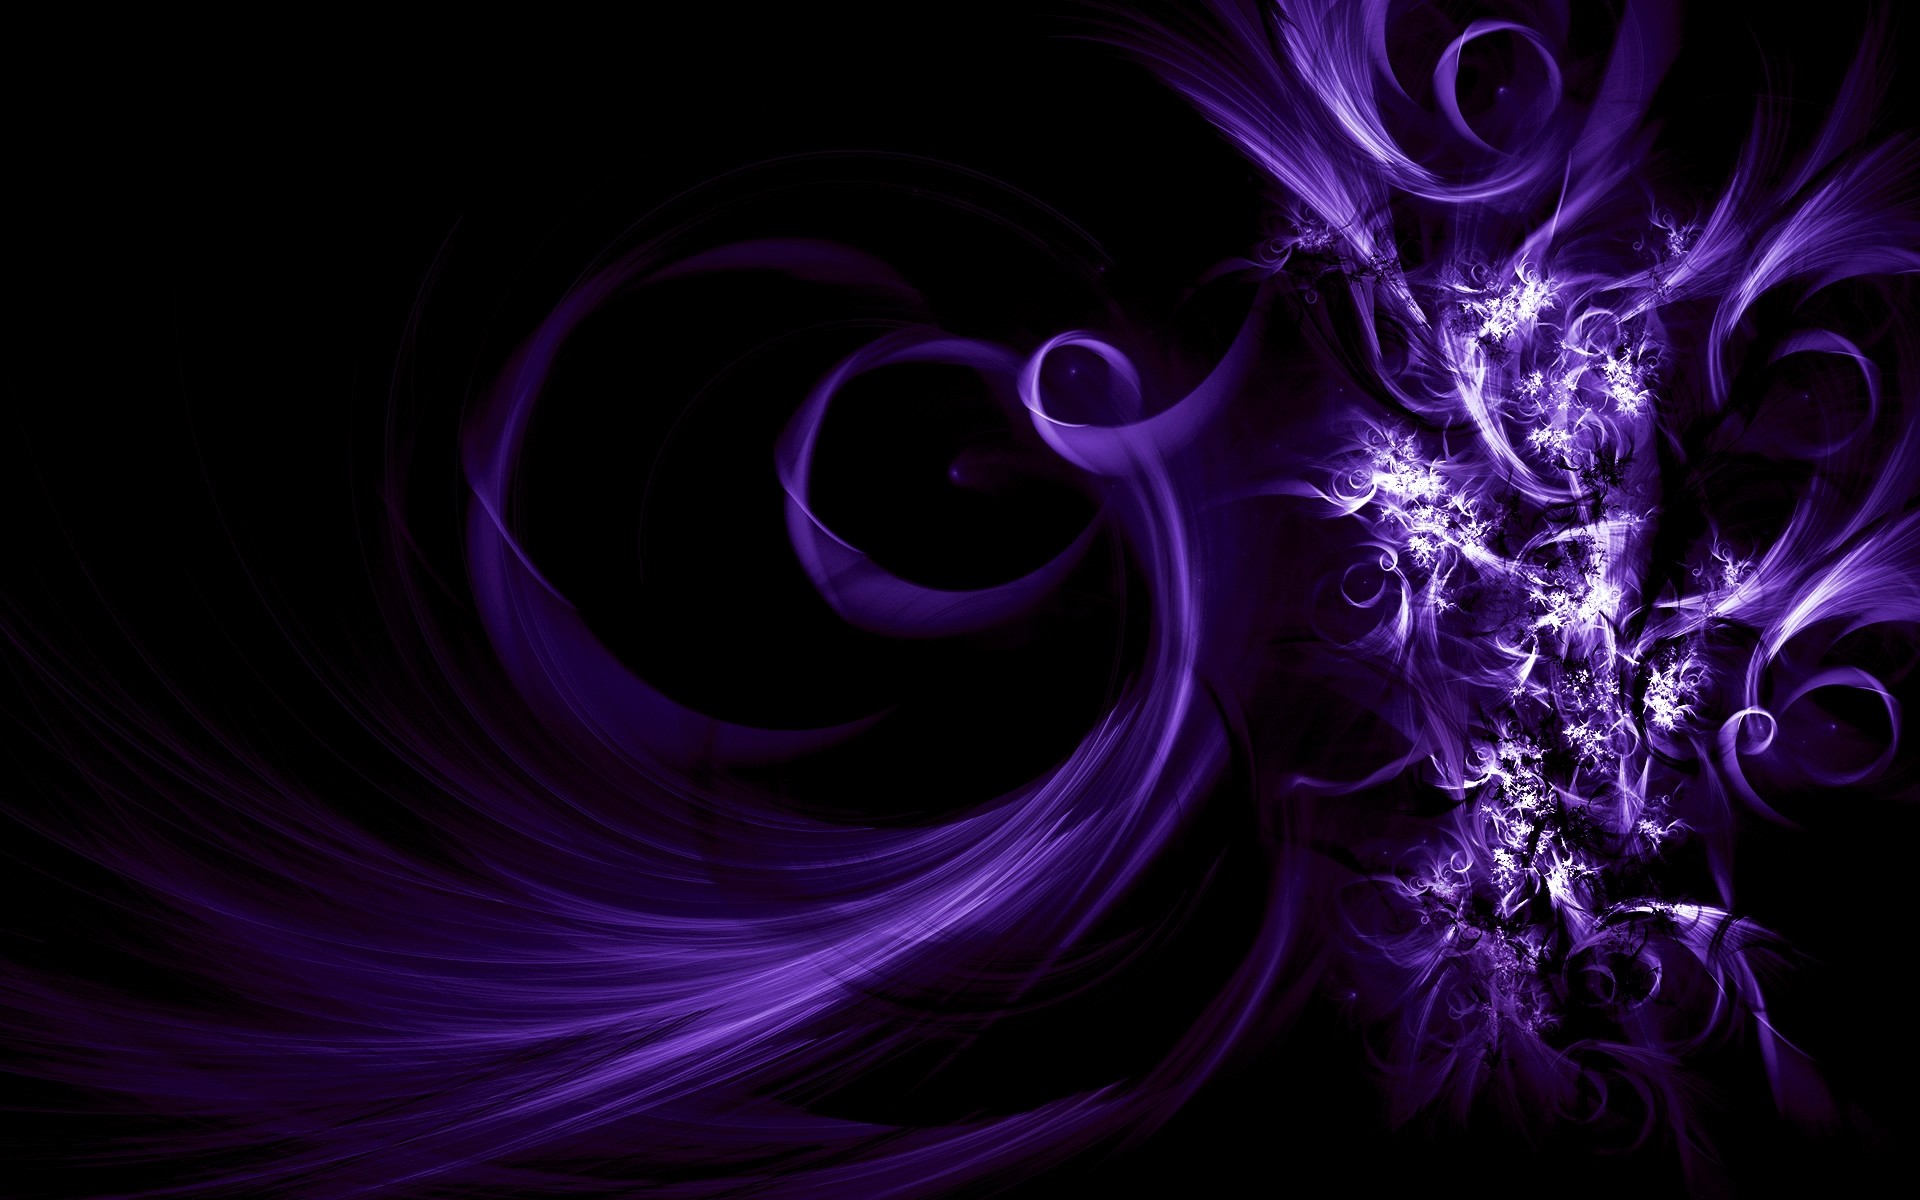 Purple Swirls Abstract wallpapers and stock photos